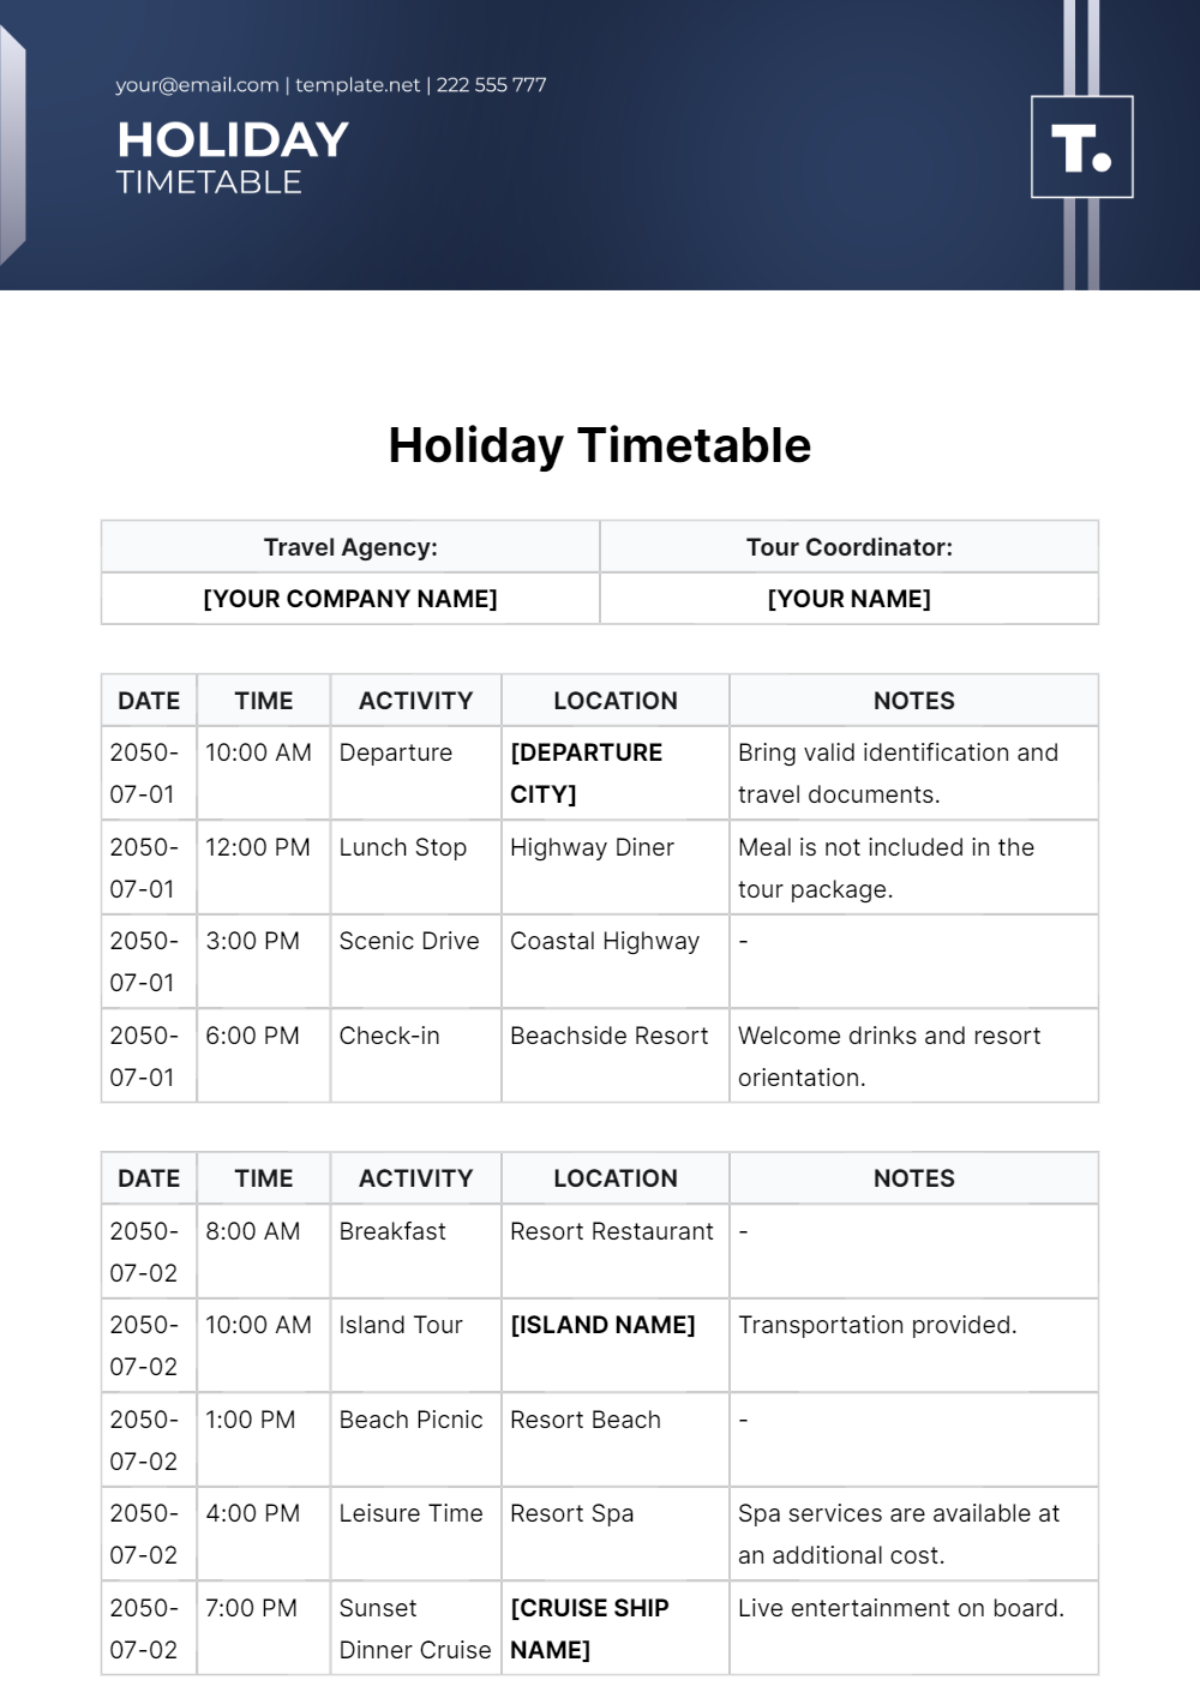 Holiday Timetable Template